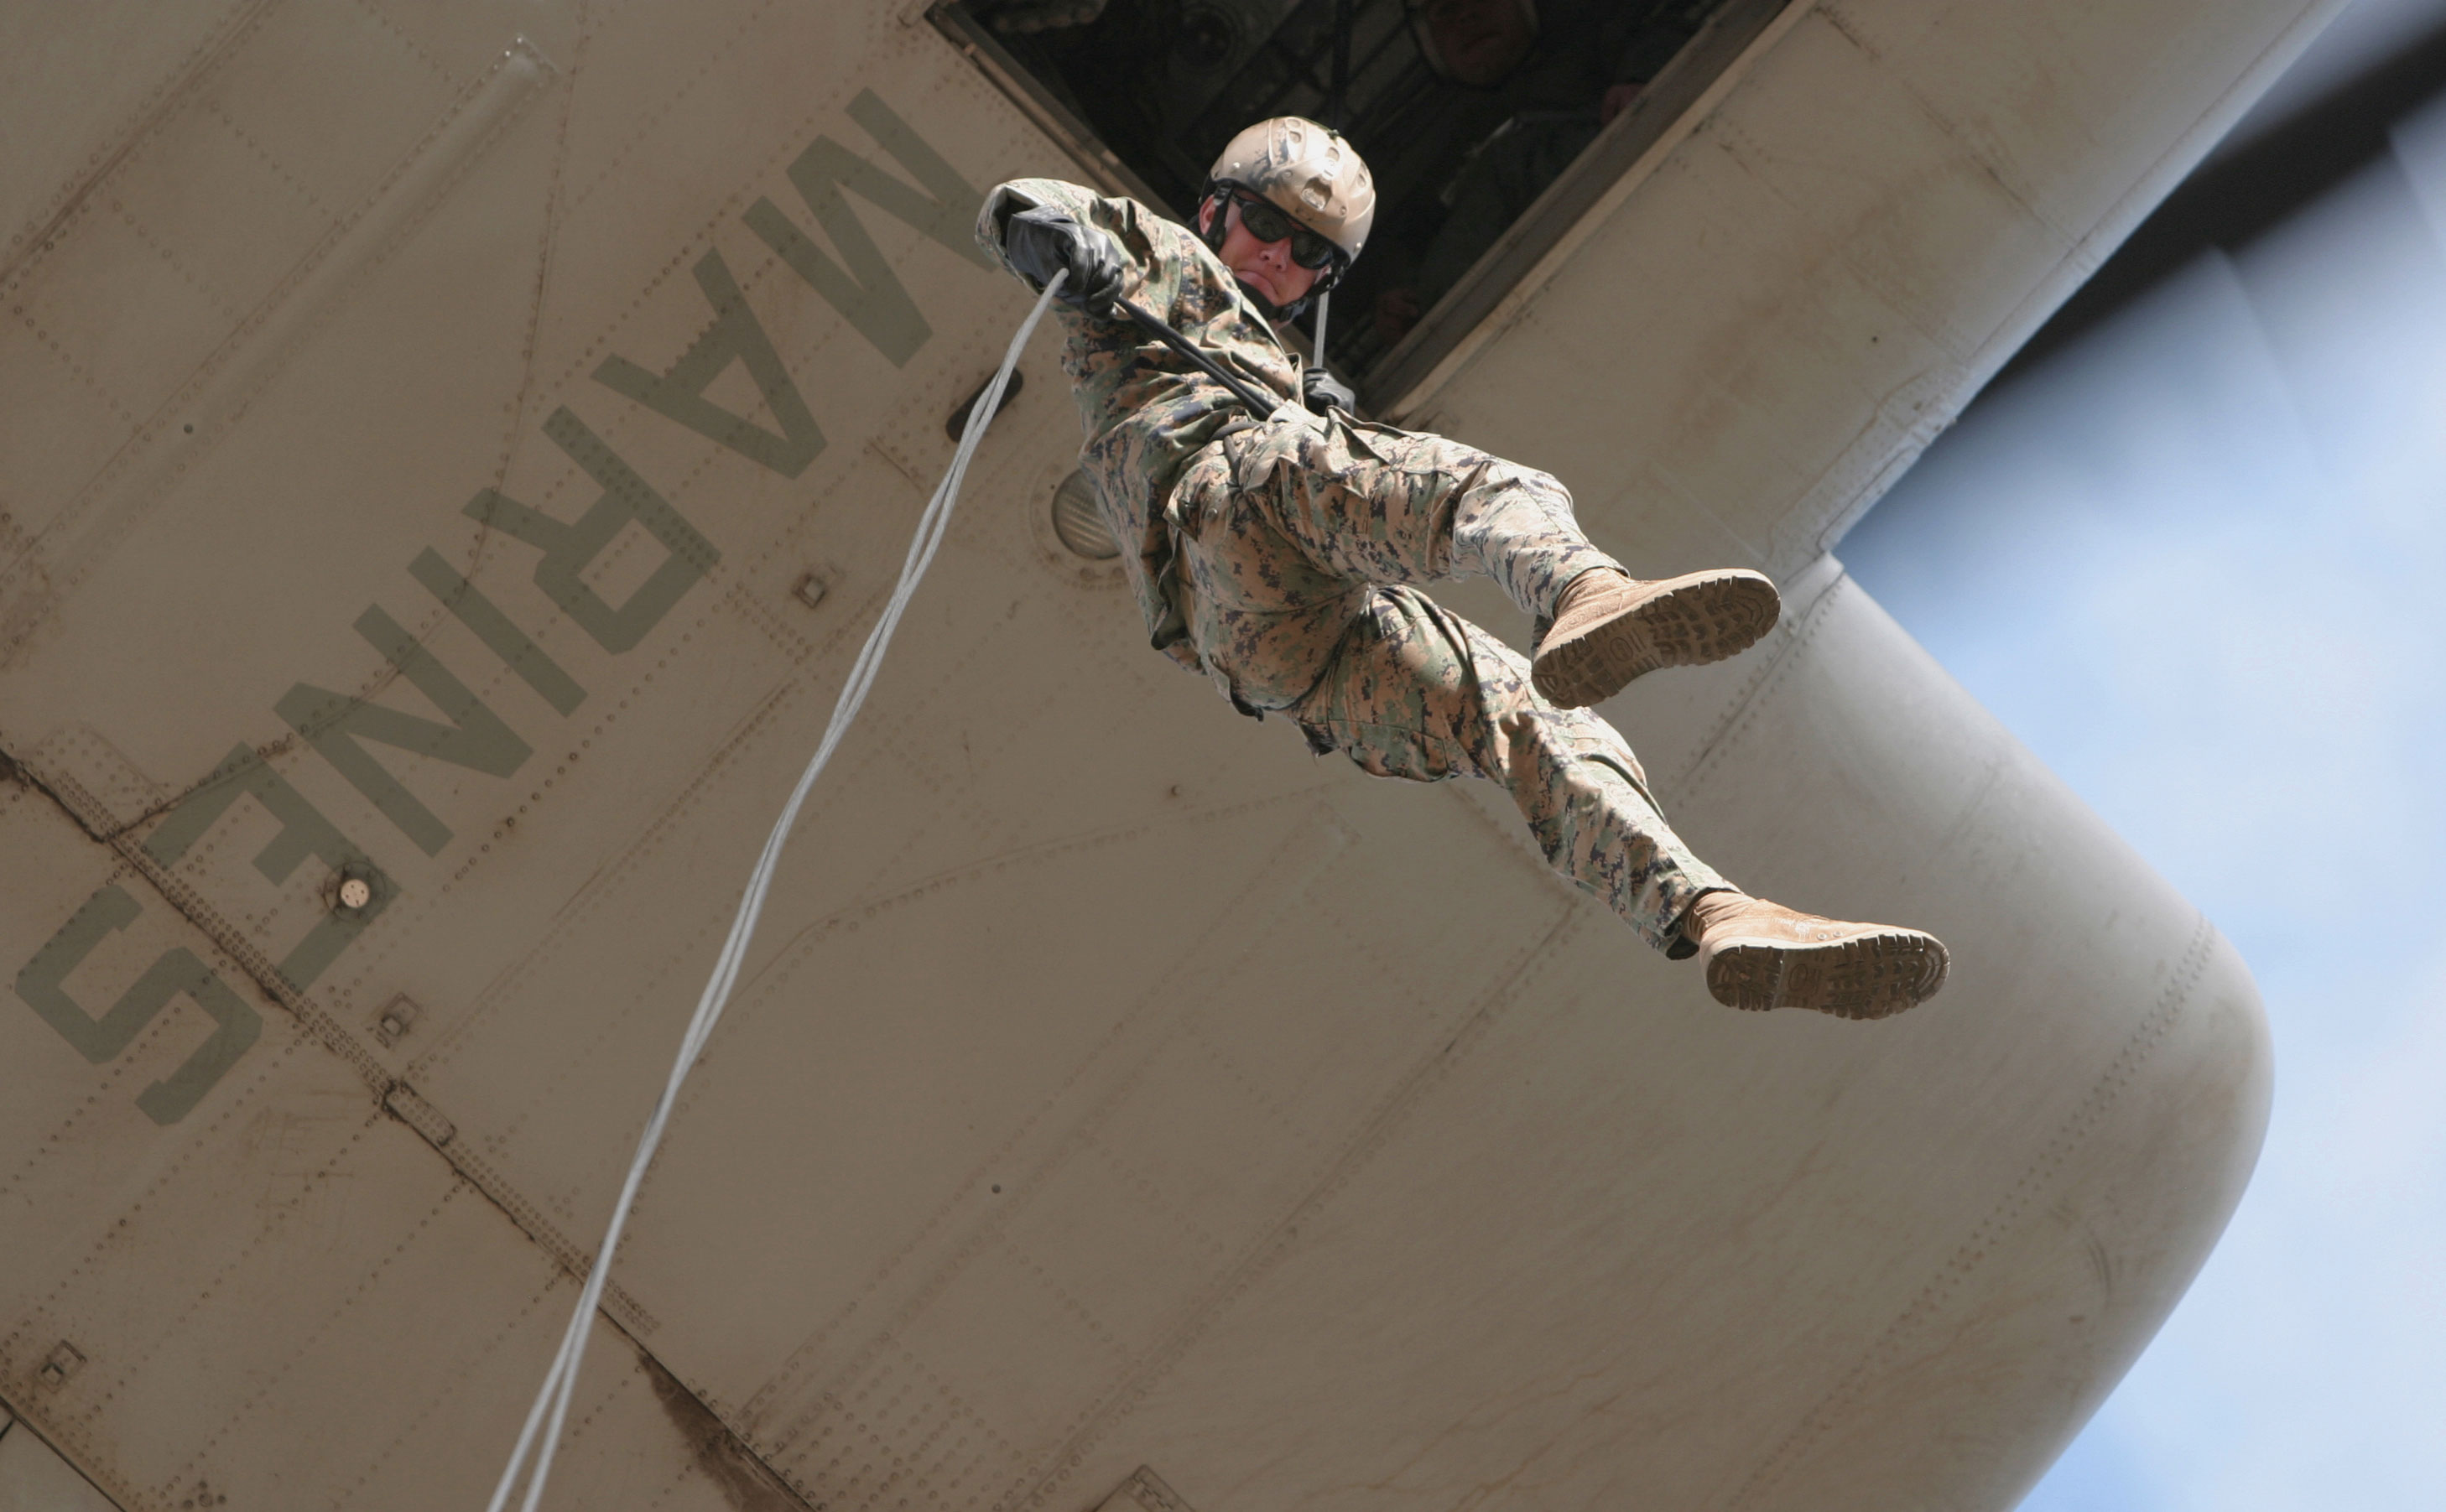 Helicopter Rope Suspension Training | MARSOC